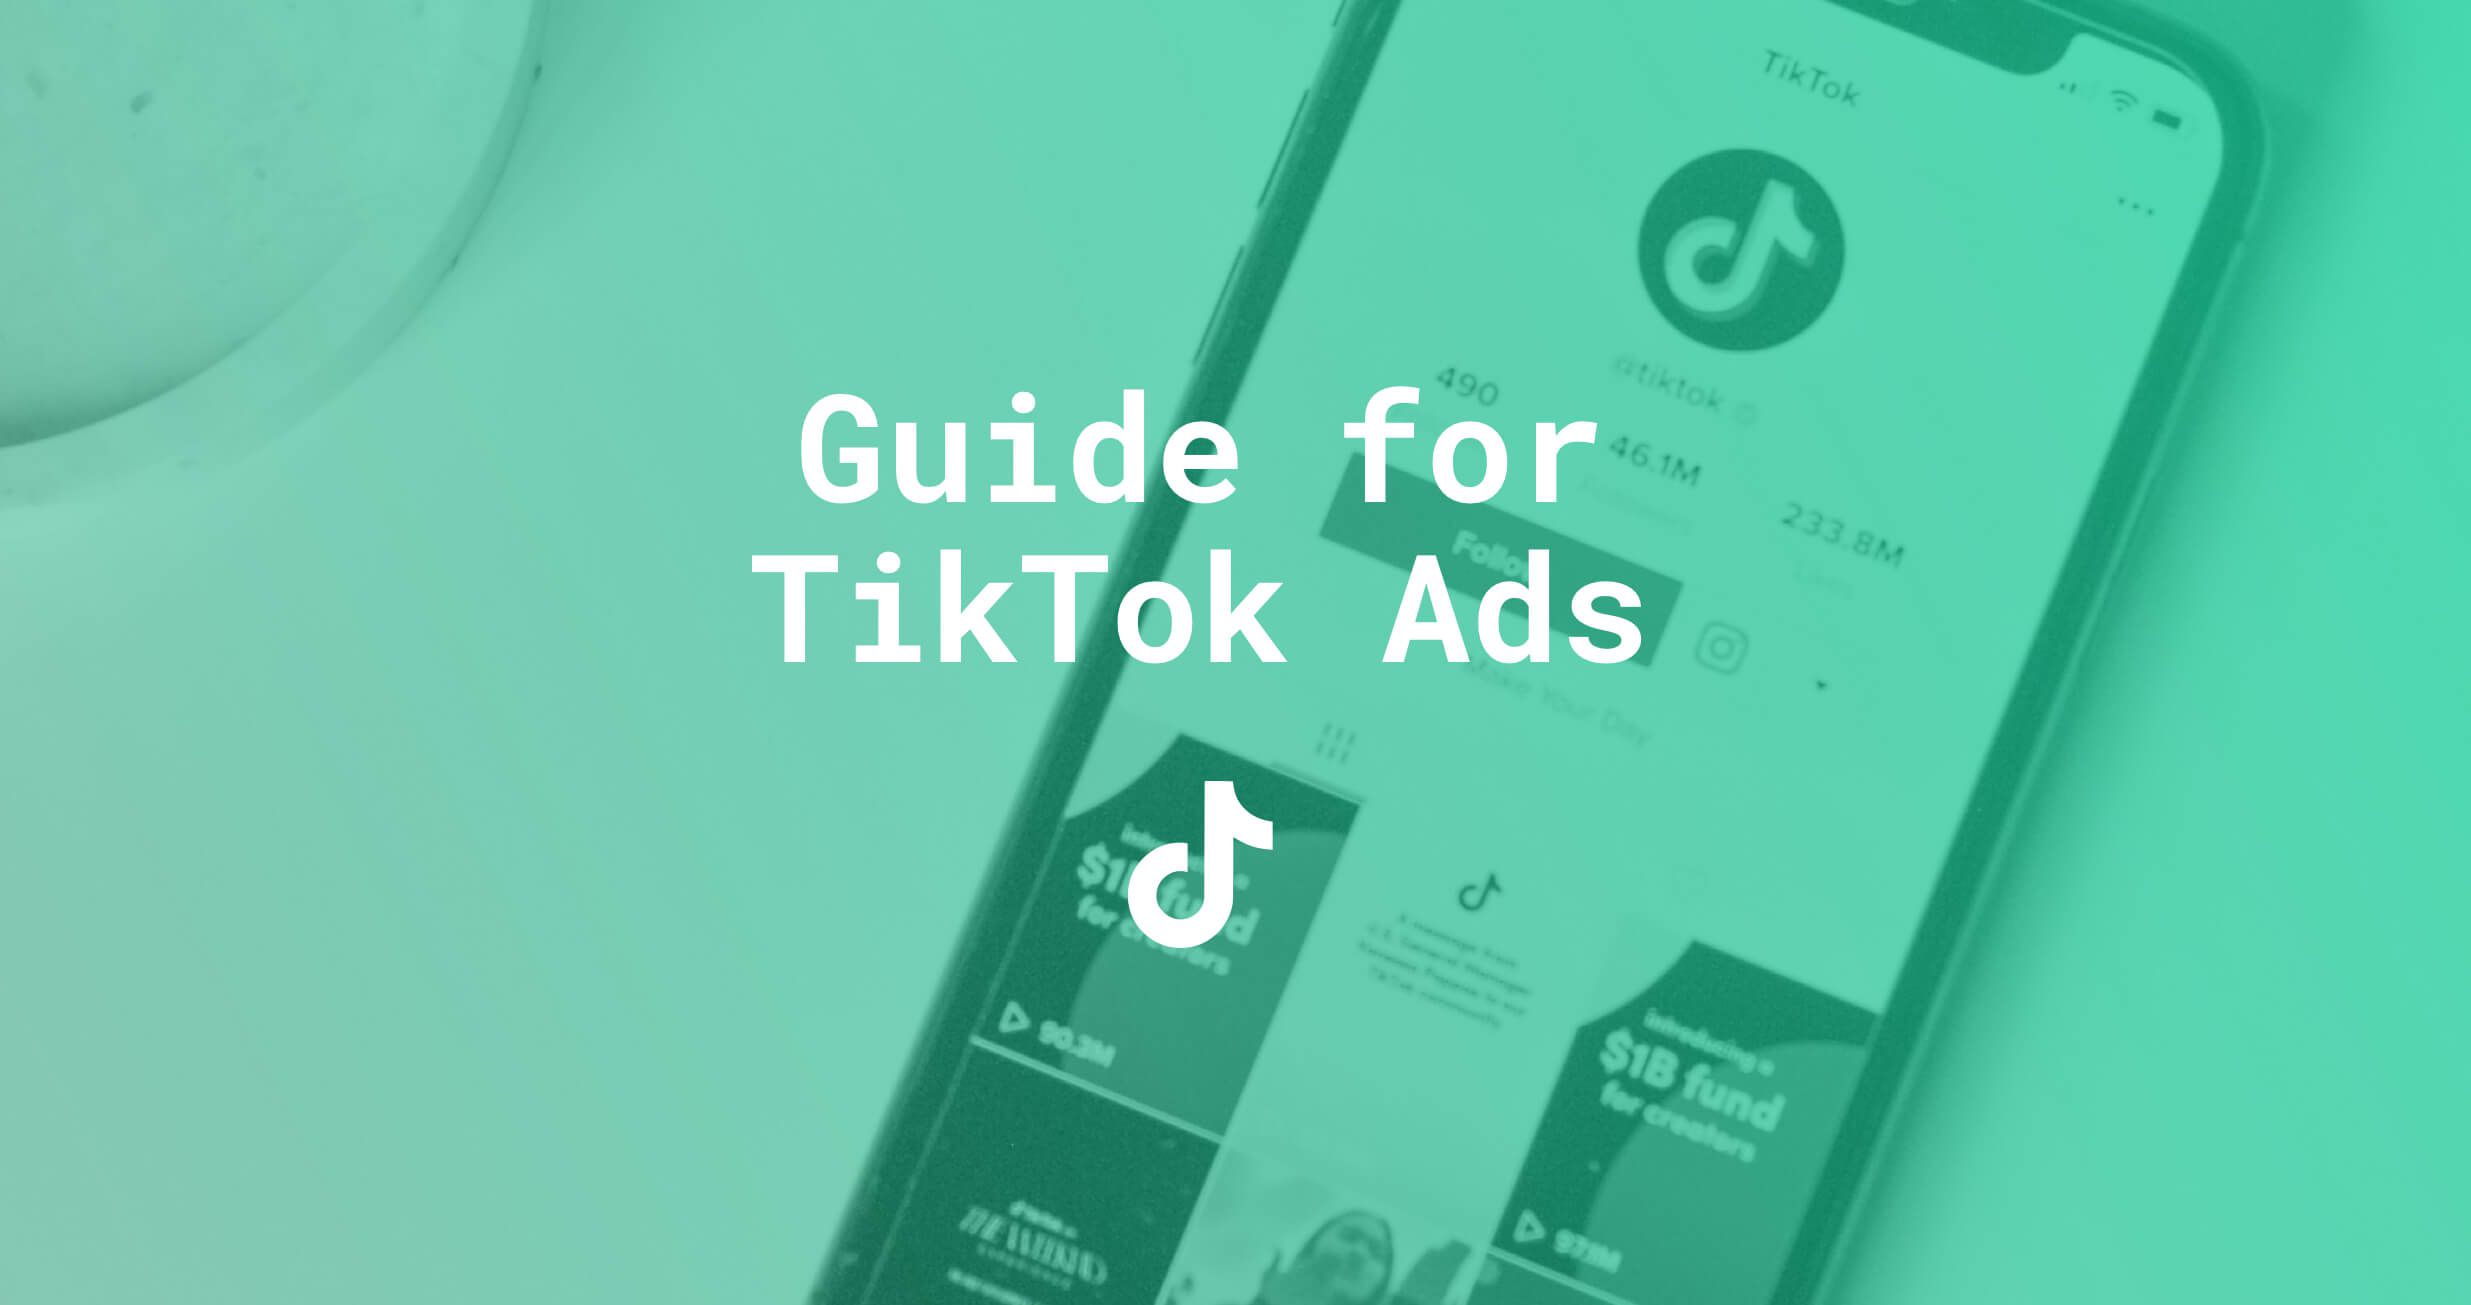 Get ready for the peak time of shopping with your first TikTok Ad